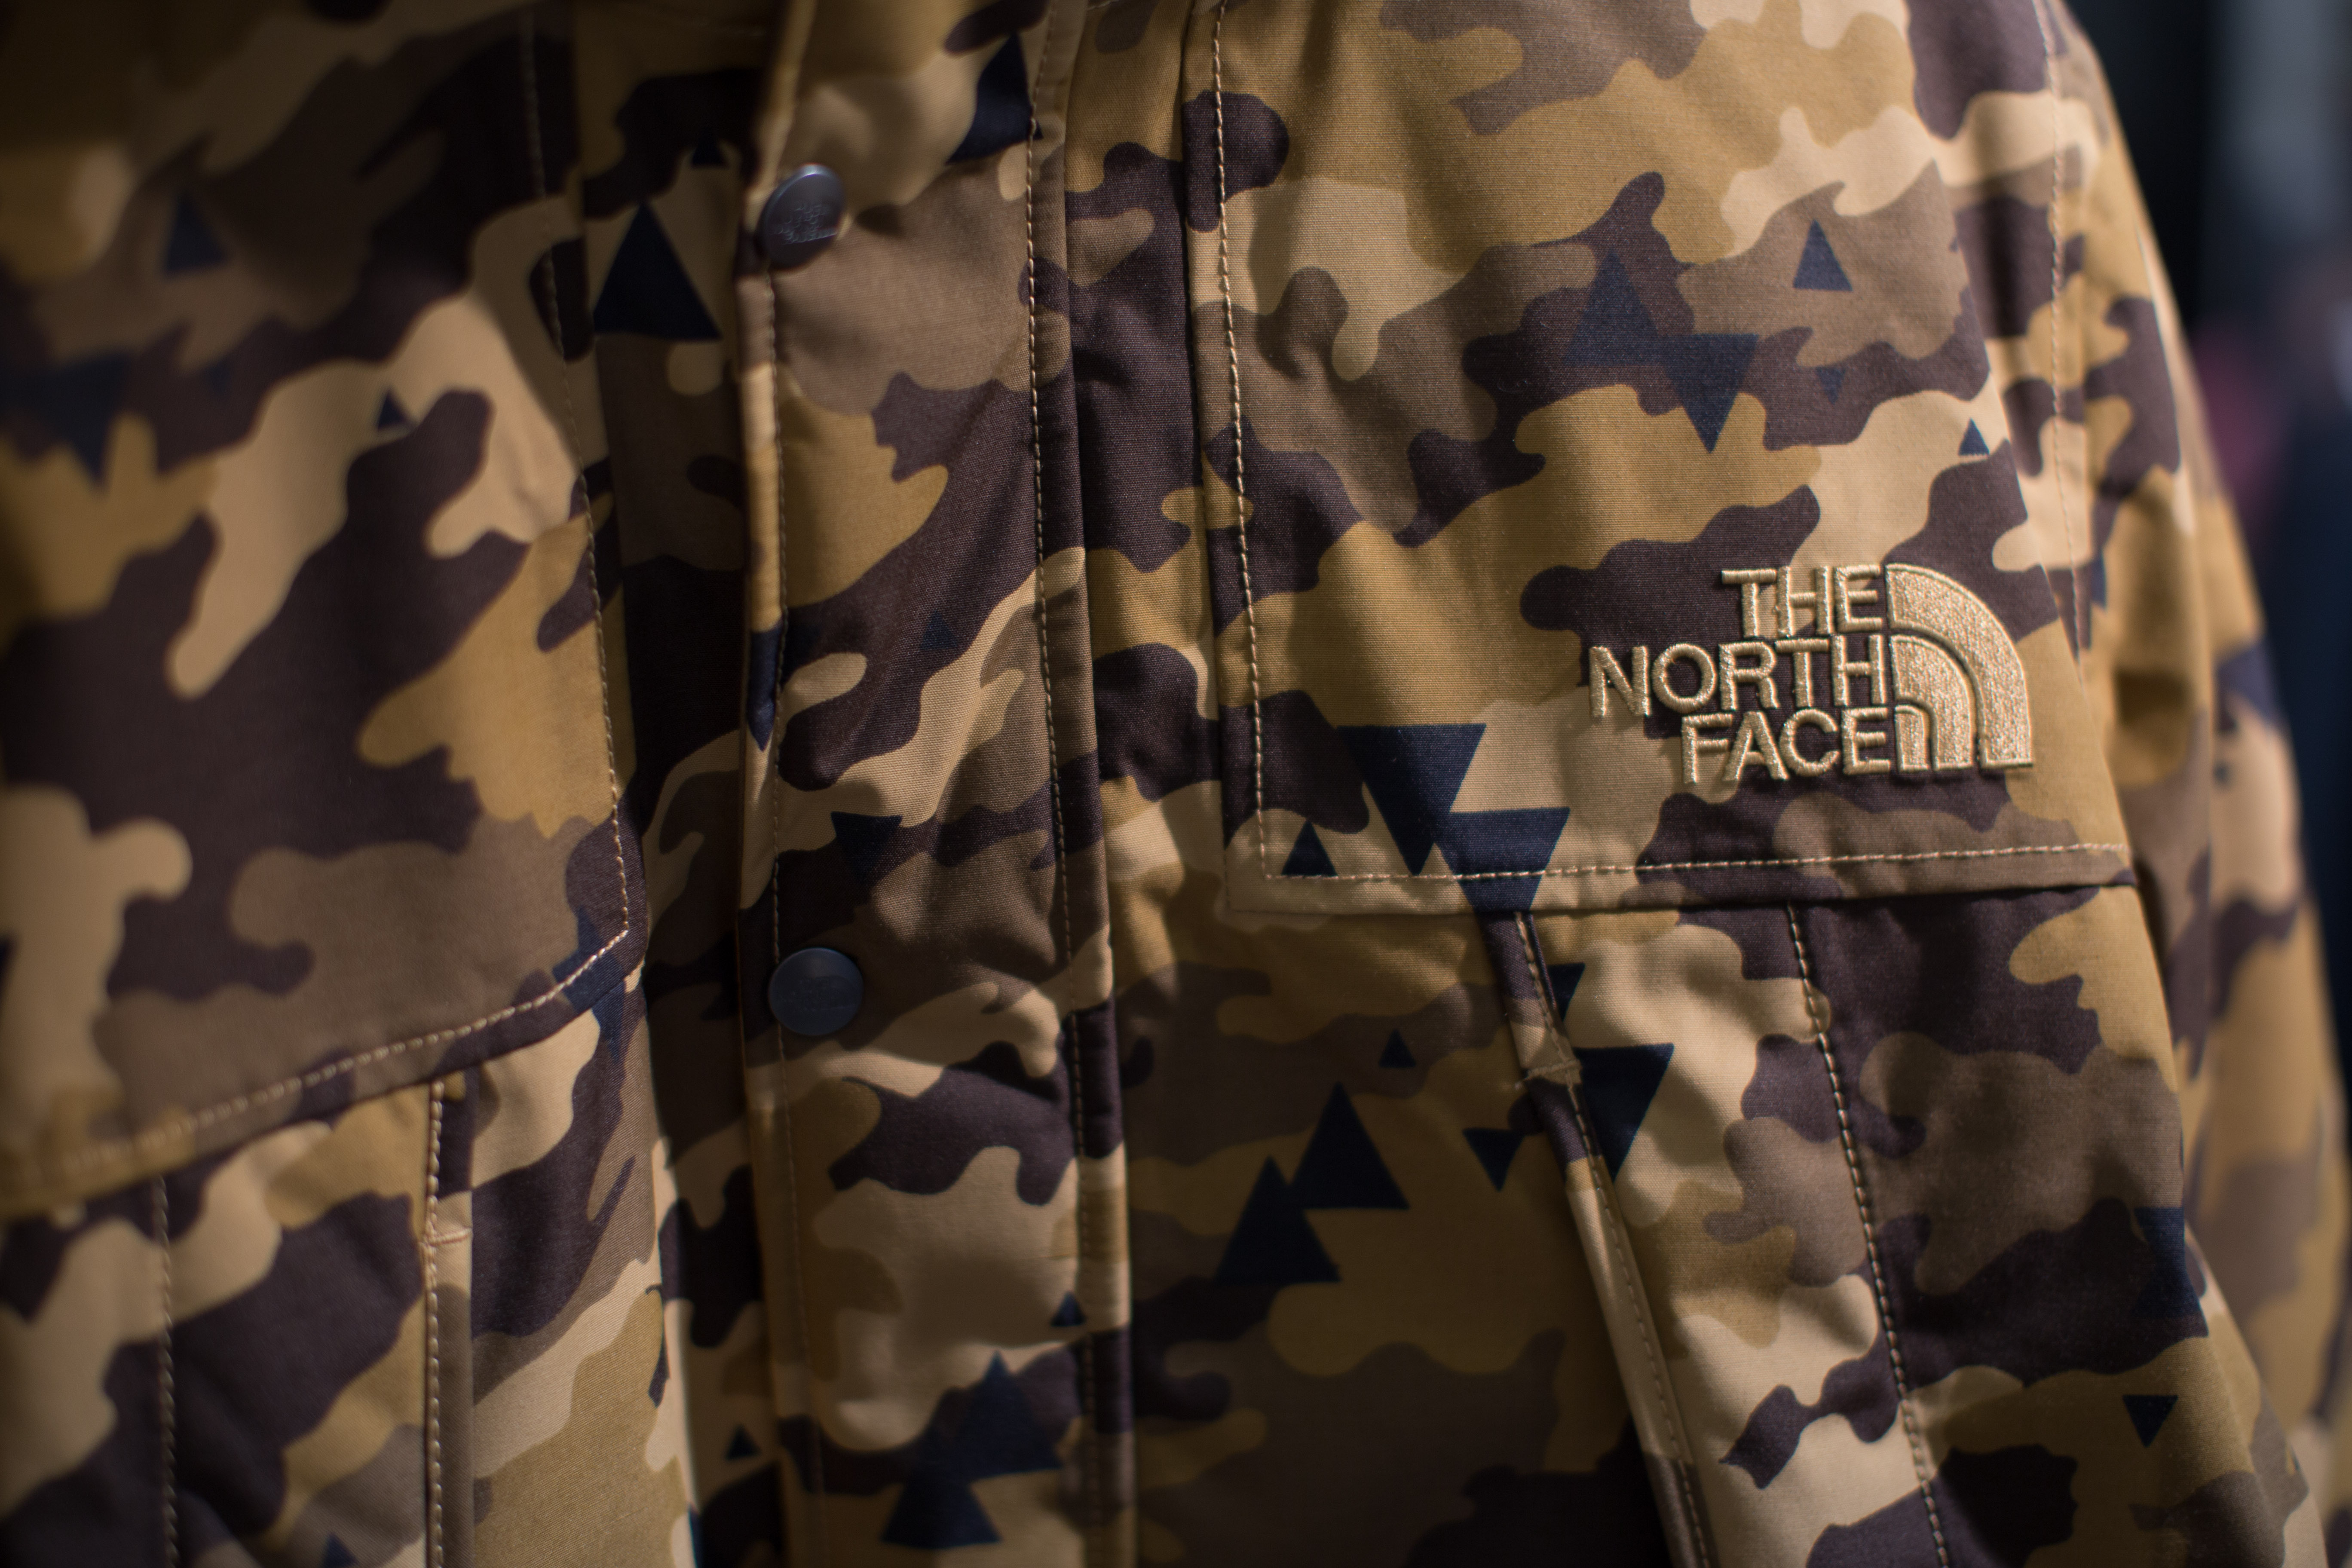 The North Face - Urban Exploration